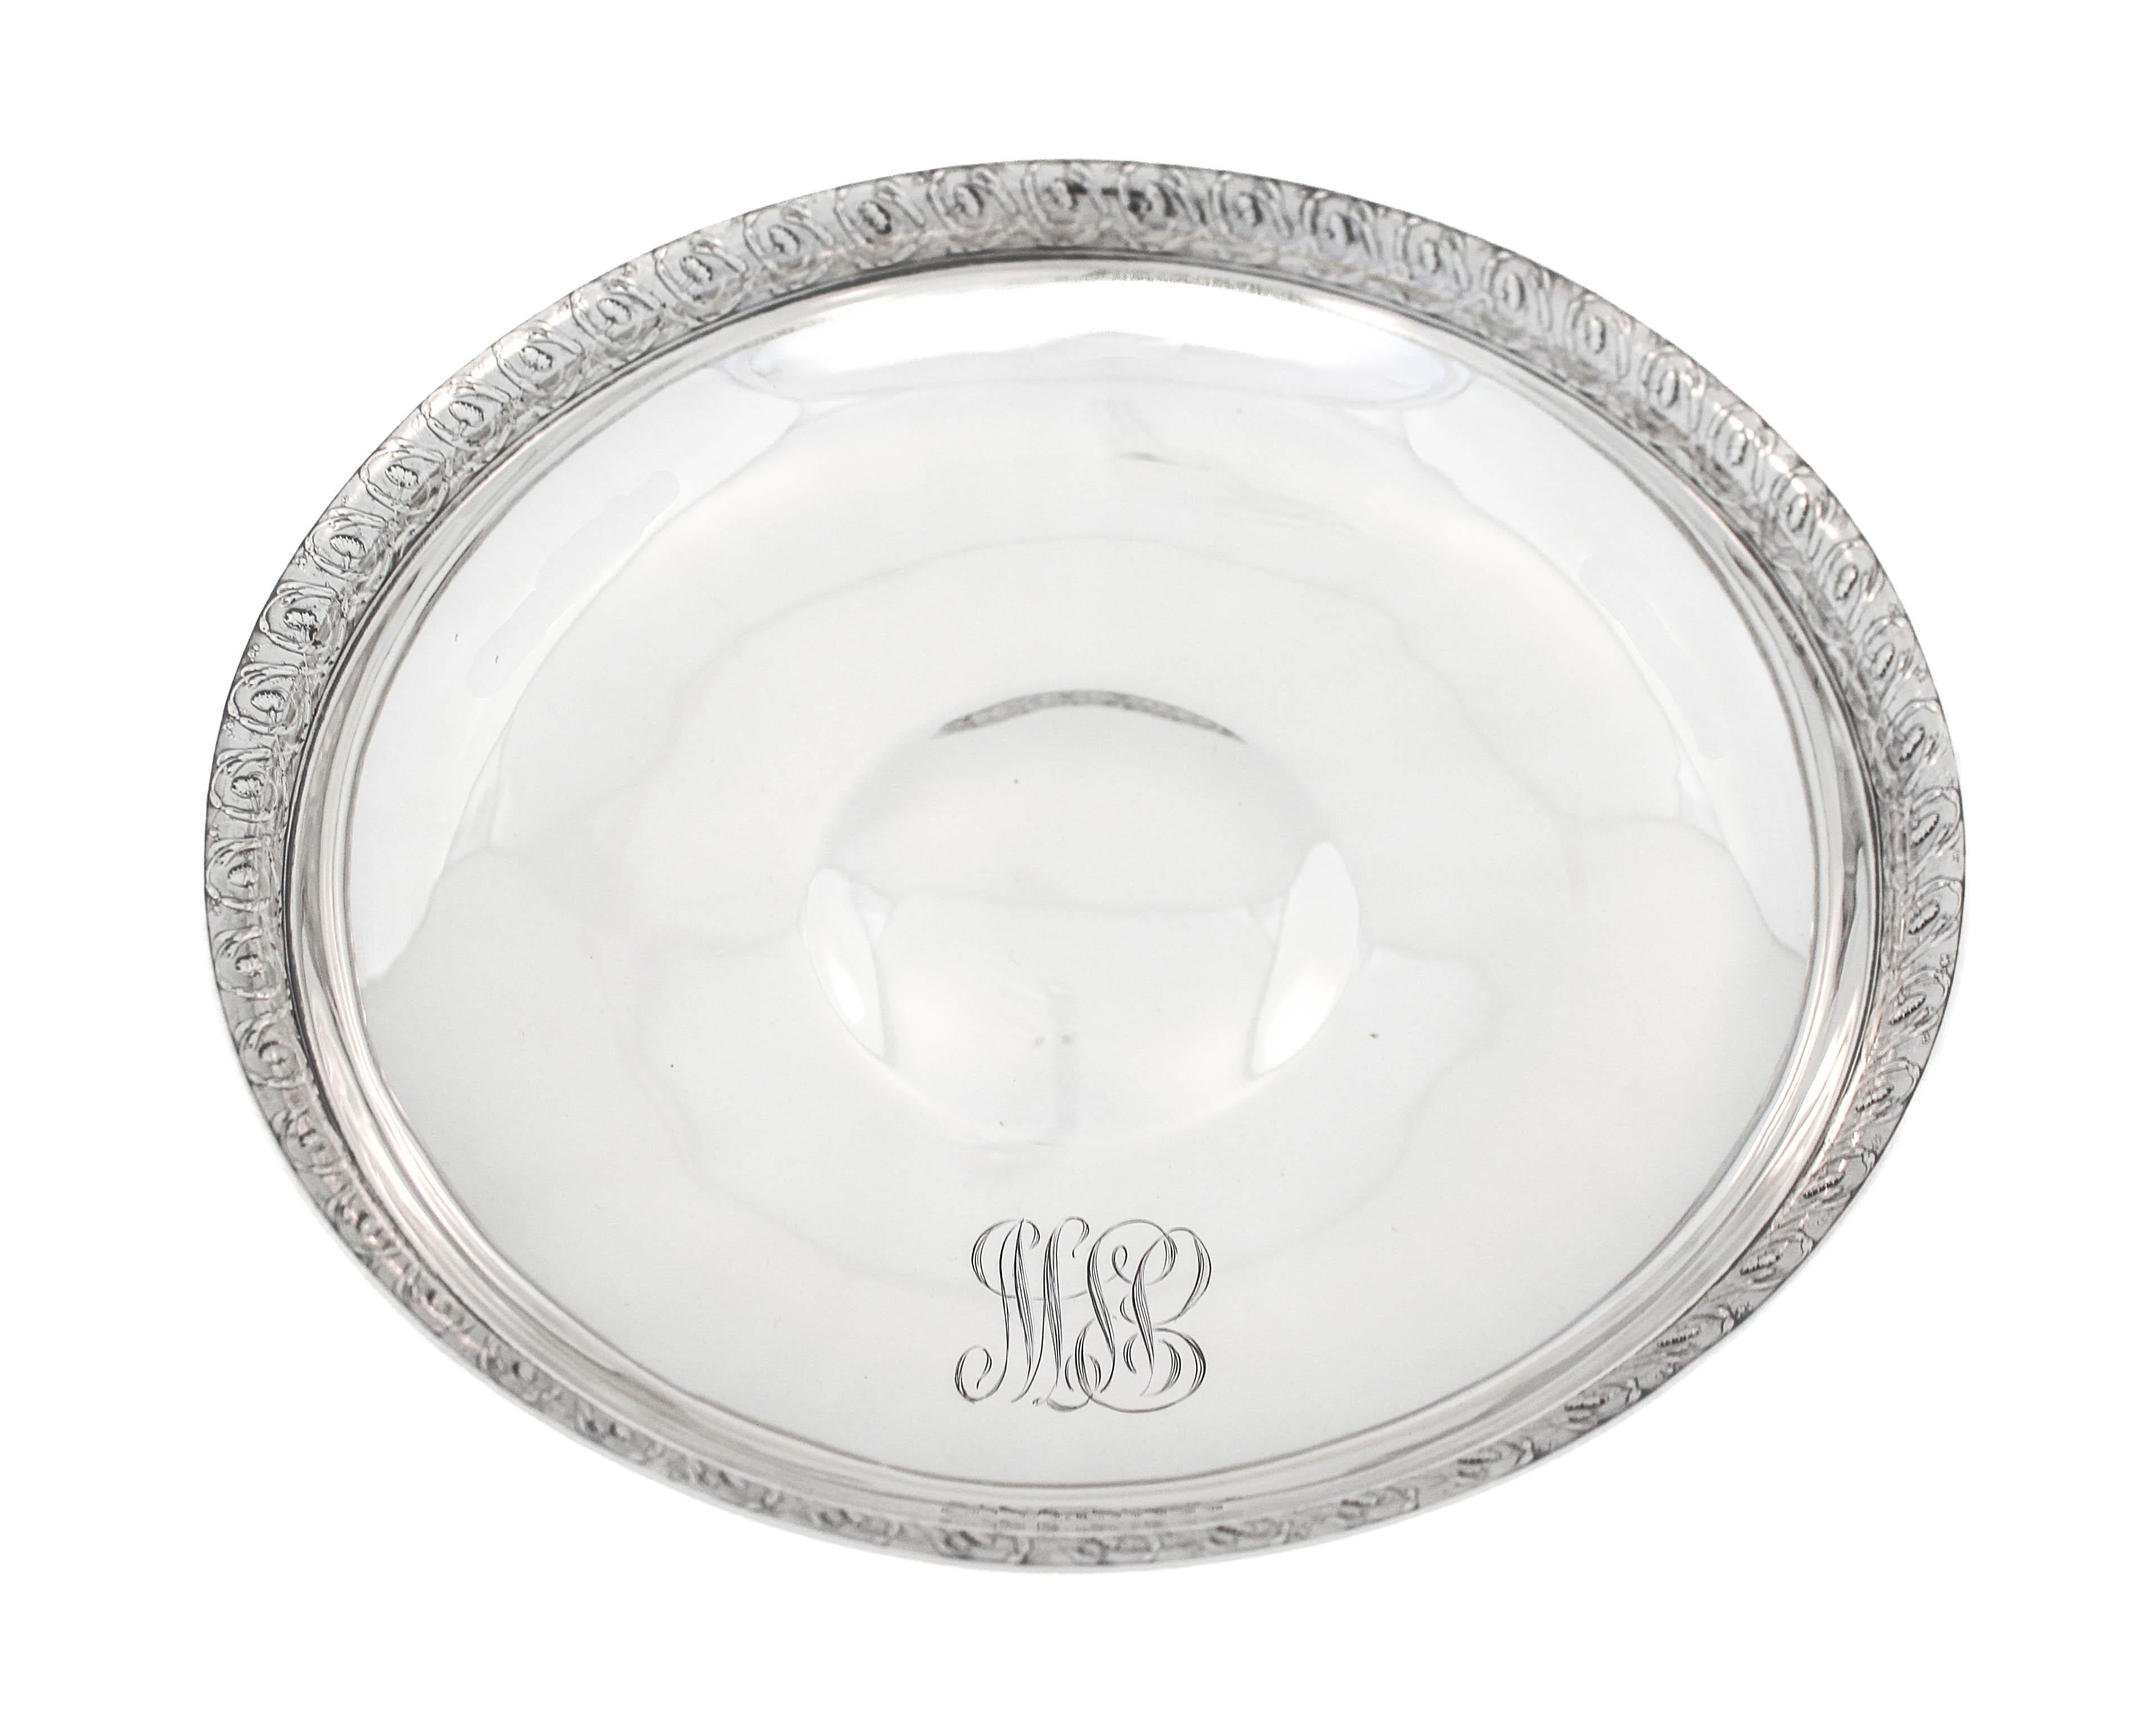 Being offered is a sterling silver footed-bowl by the world renowned Tiffany and Co.  There is a floral motif around the base of the pedestal and again around the edge of the bowl.  The design is twice as large on the top as it is around the base. 